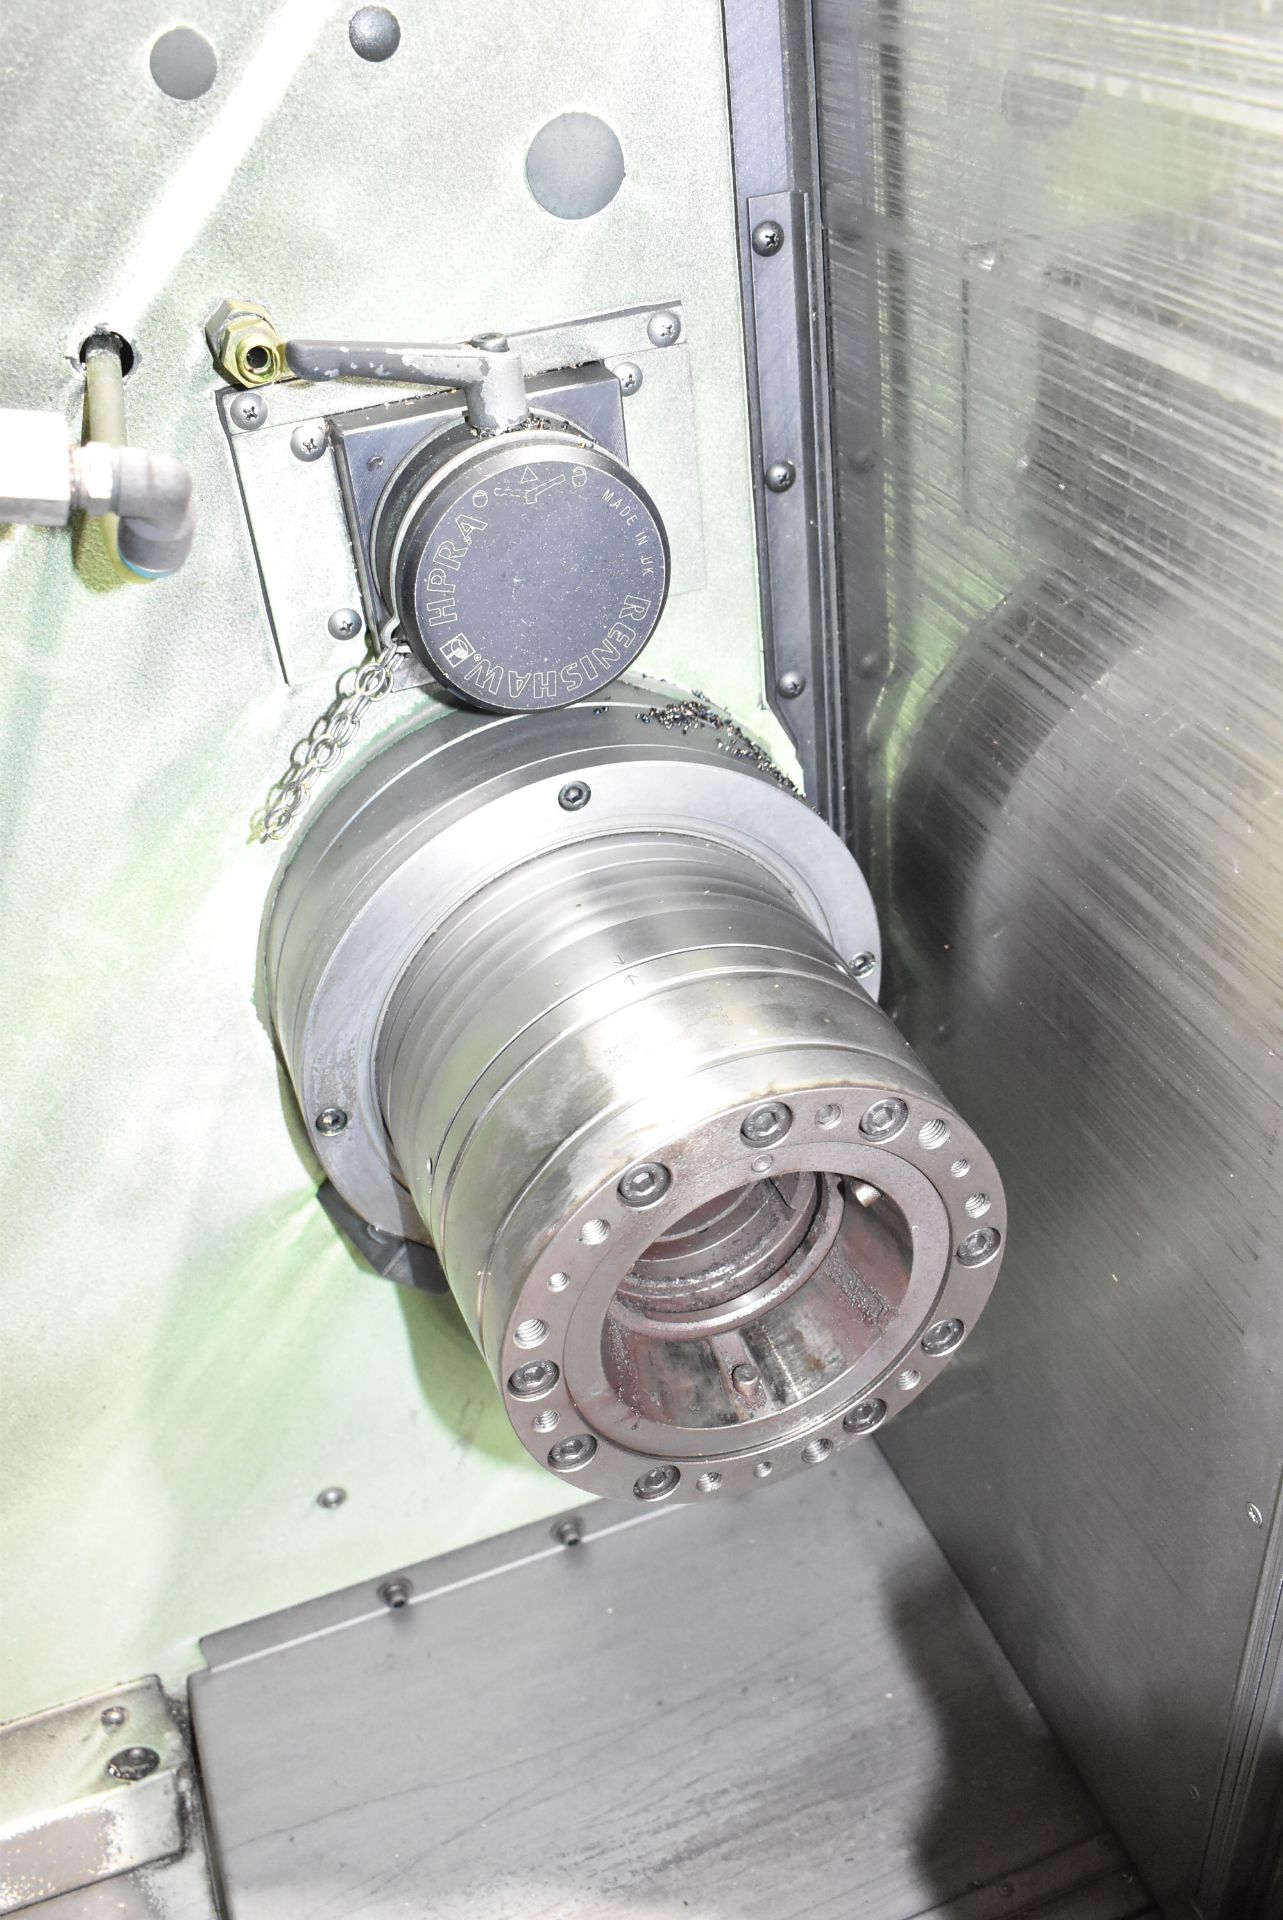 NAKAMURA-TOME (2013) WT-250 II S MULTI-AXIS OPPOSED SPINDLE AND TWIN TURRET CNC MULTI-TASKING CENTER - Image 2 of 21